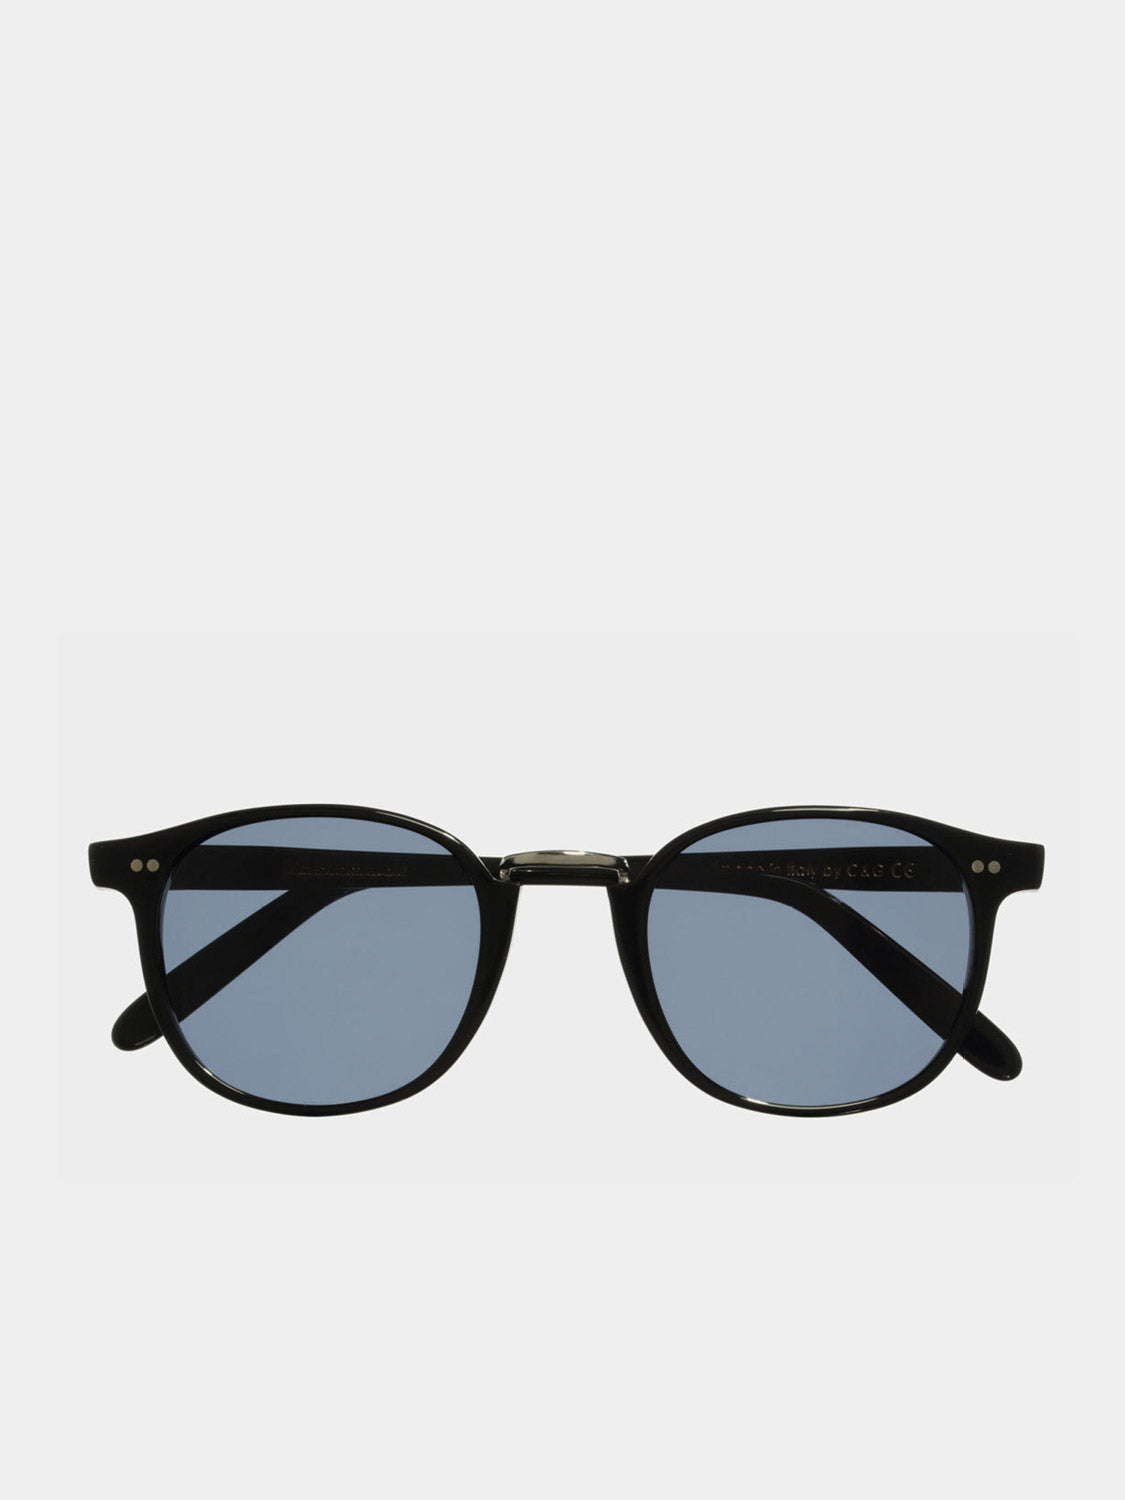 Cutler and Gross 1007 Round-Frame Black Acetate Sunglasses